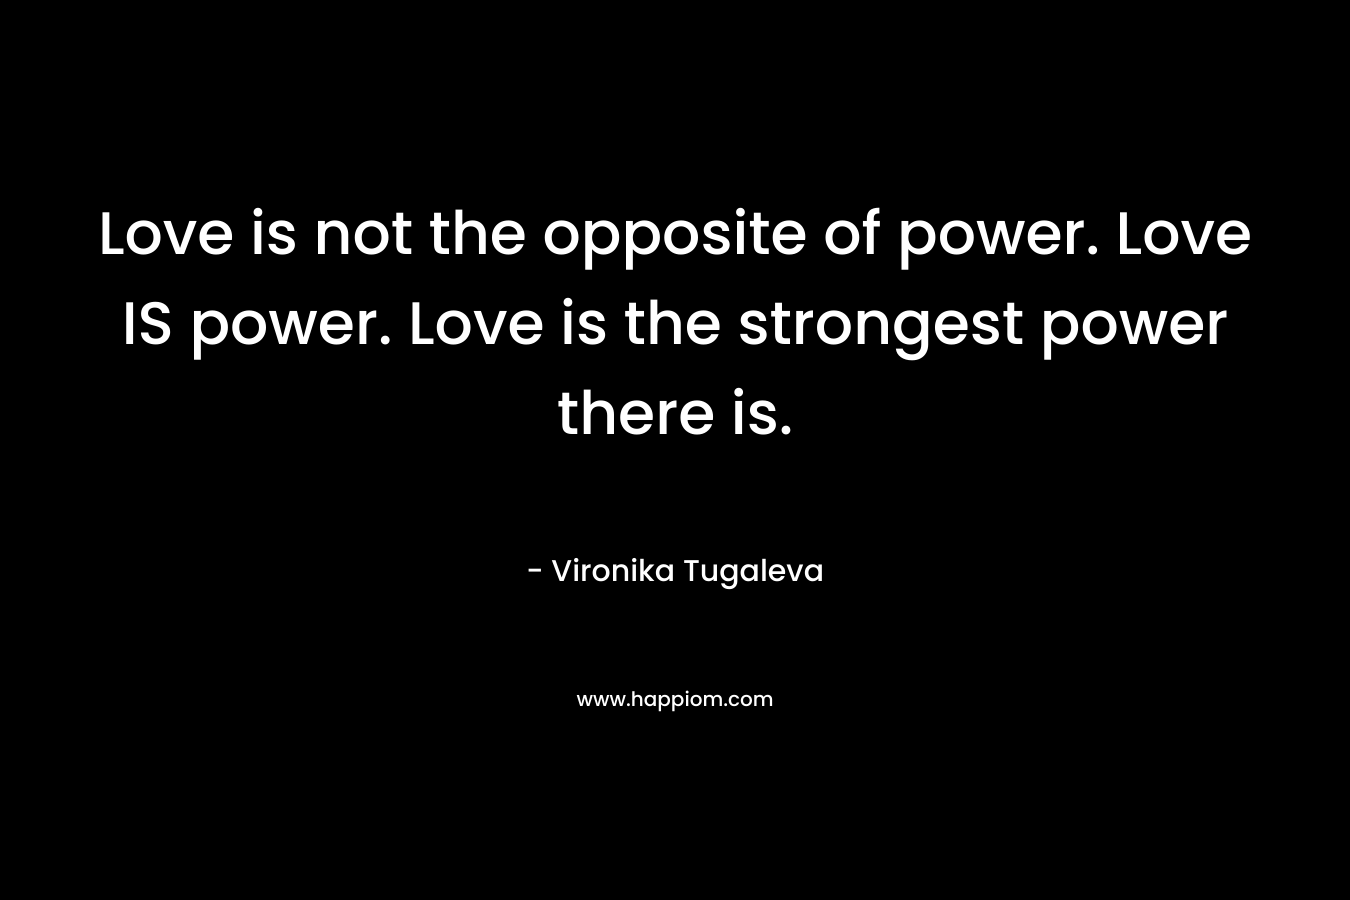 Love is not the opposite of power. Love IS power. Love is the strongest power there is. – Vironika Tugaleva